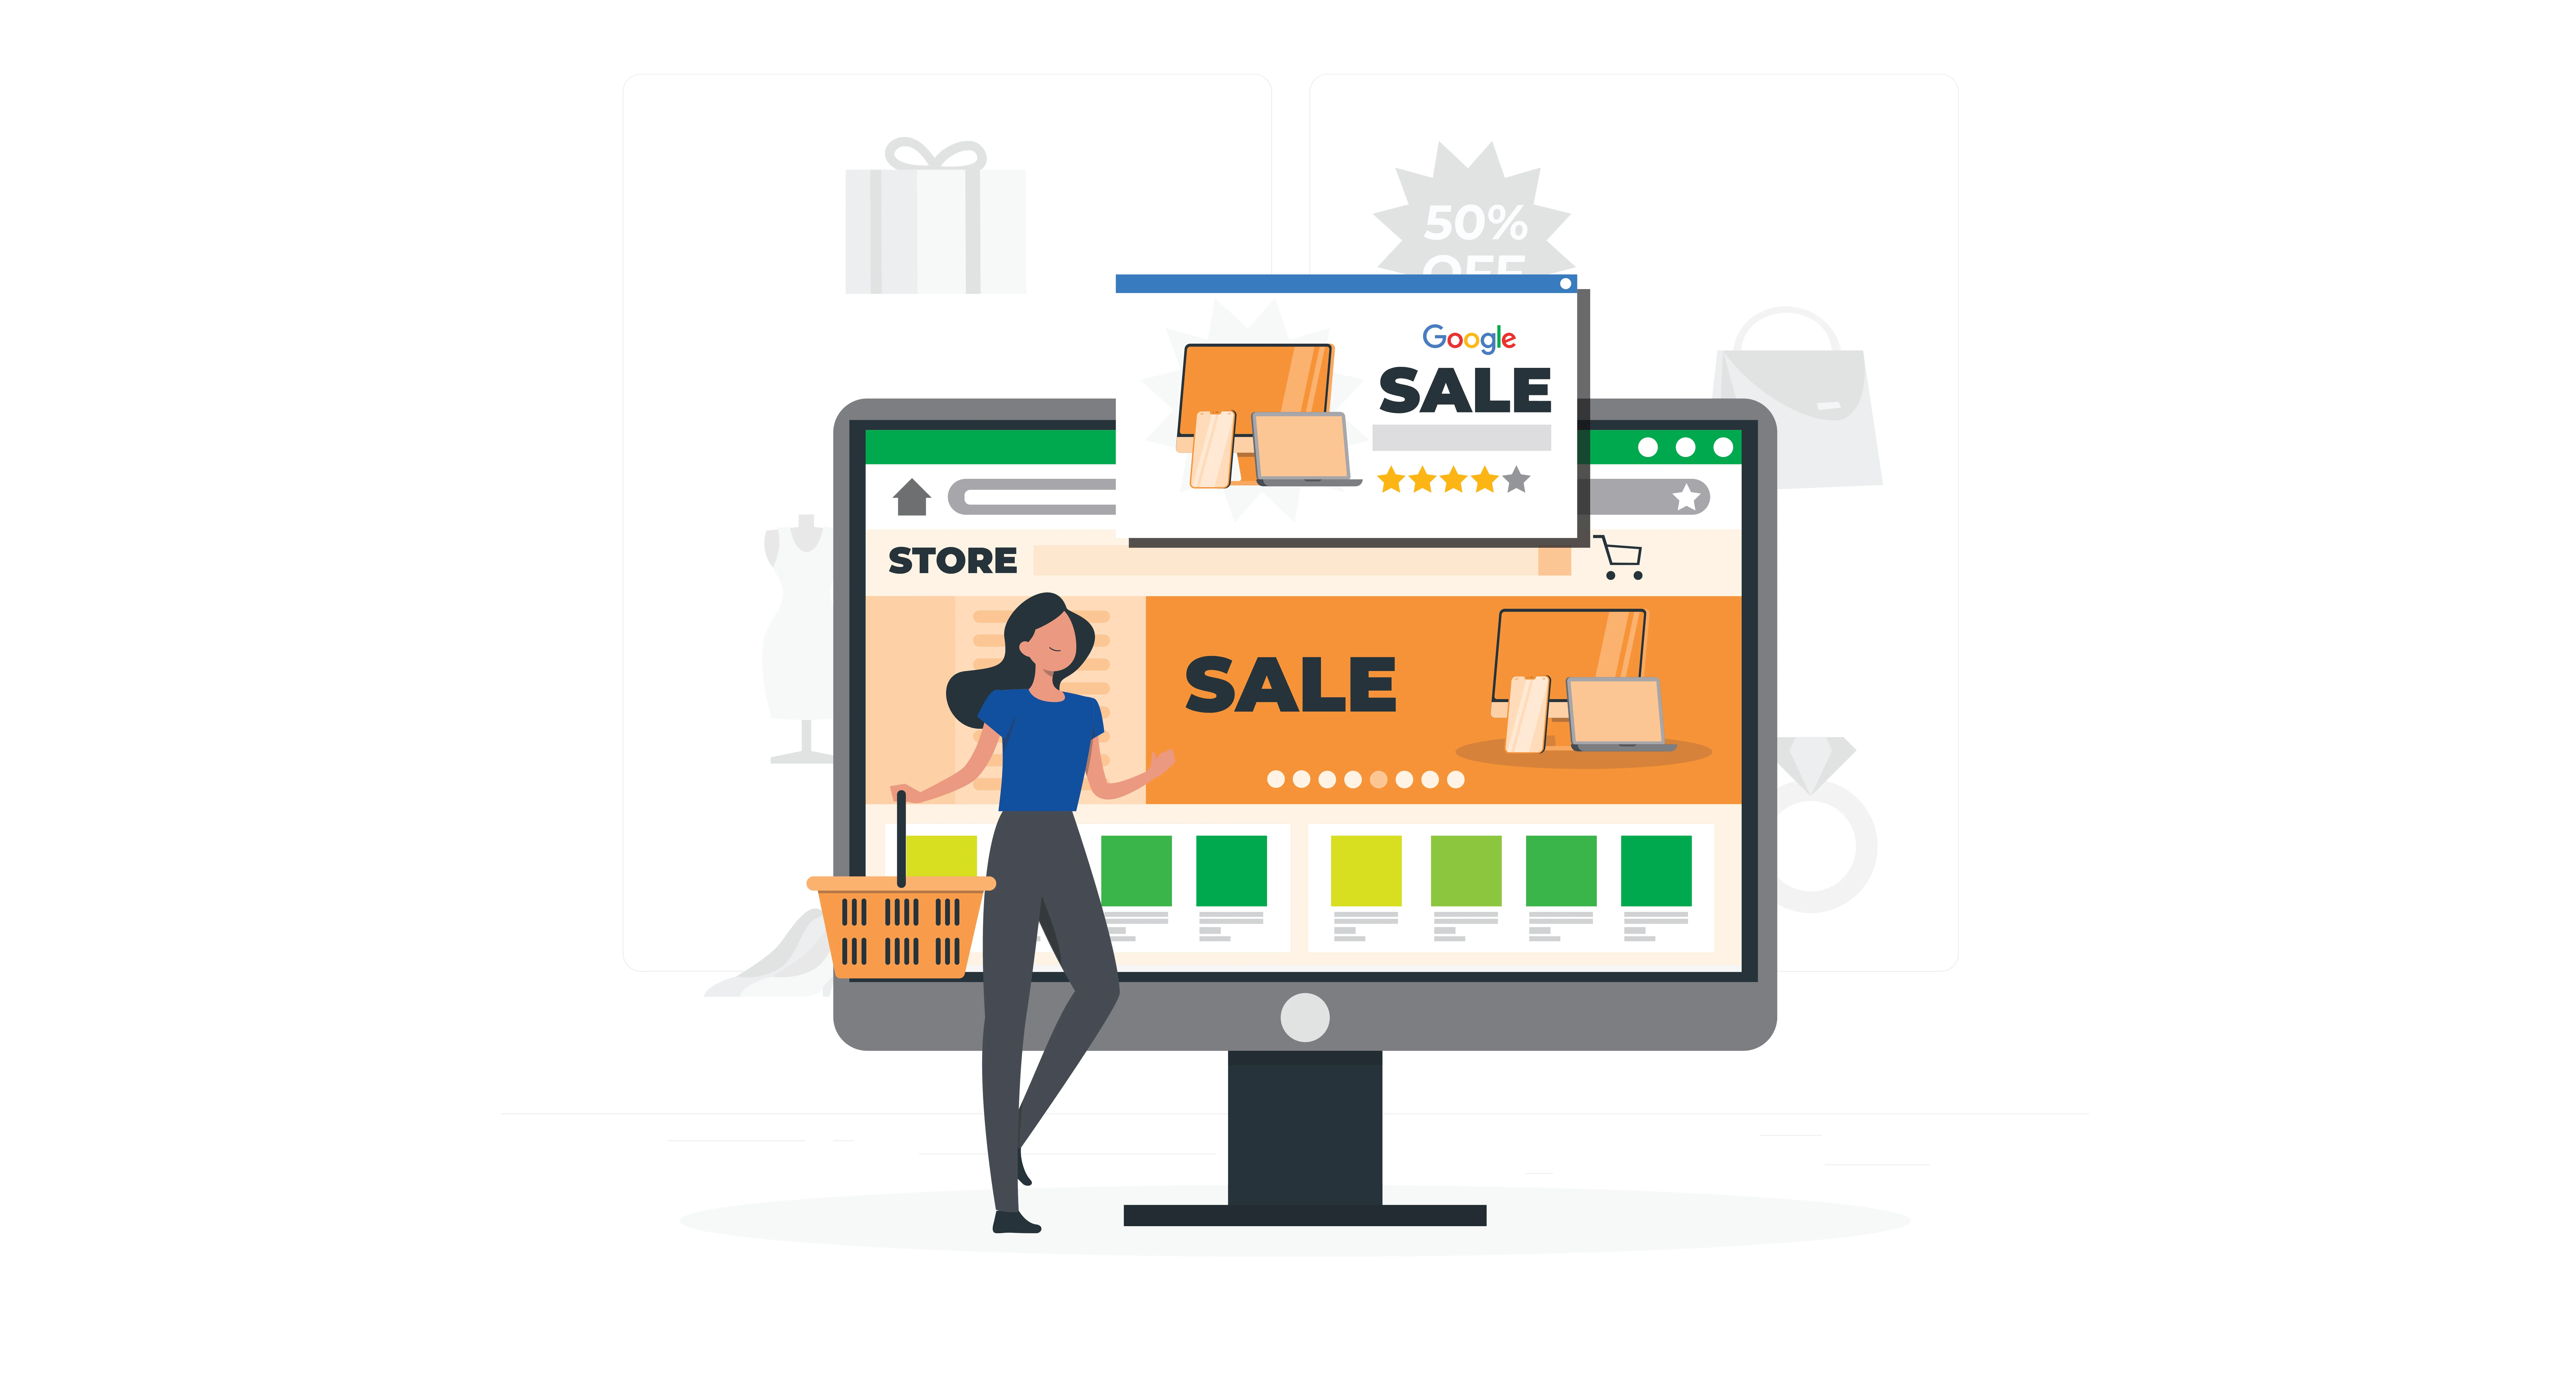 Why Shopify Store Owners Should Advertise Their Stores on Google